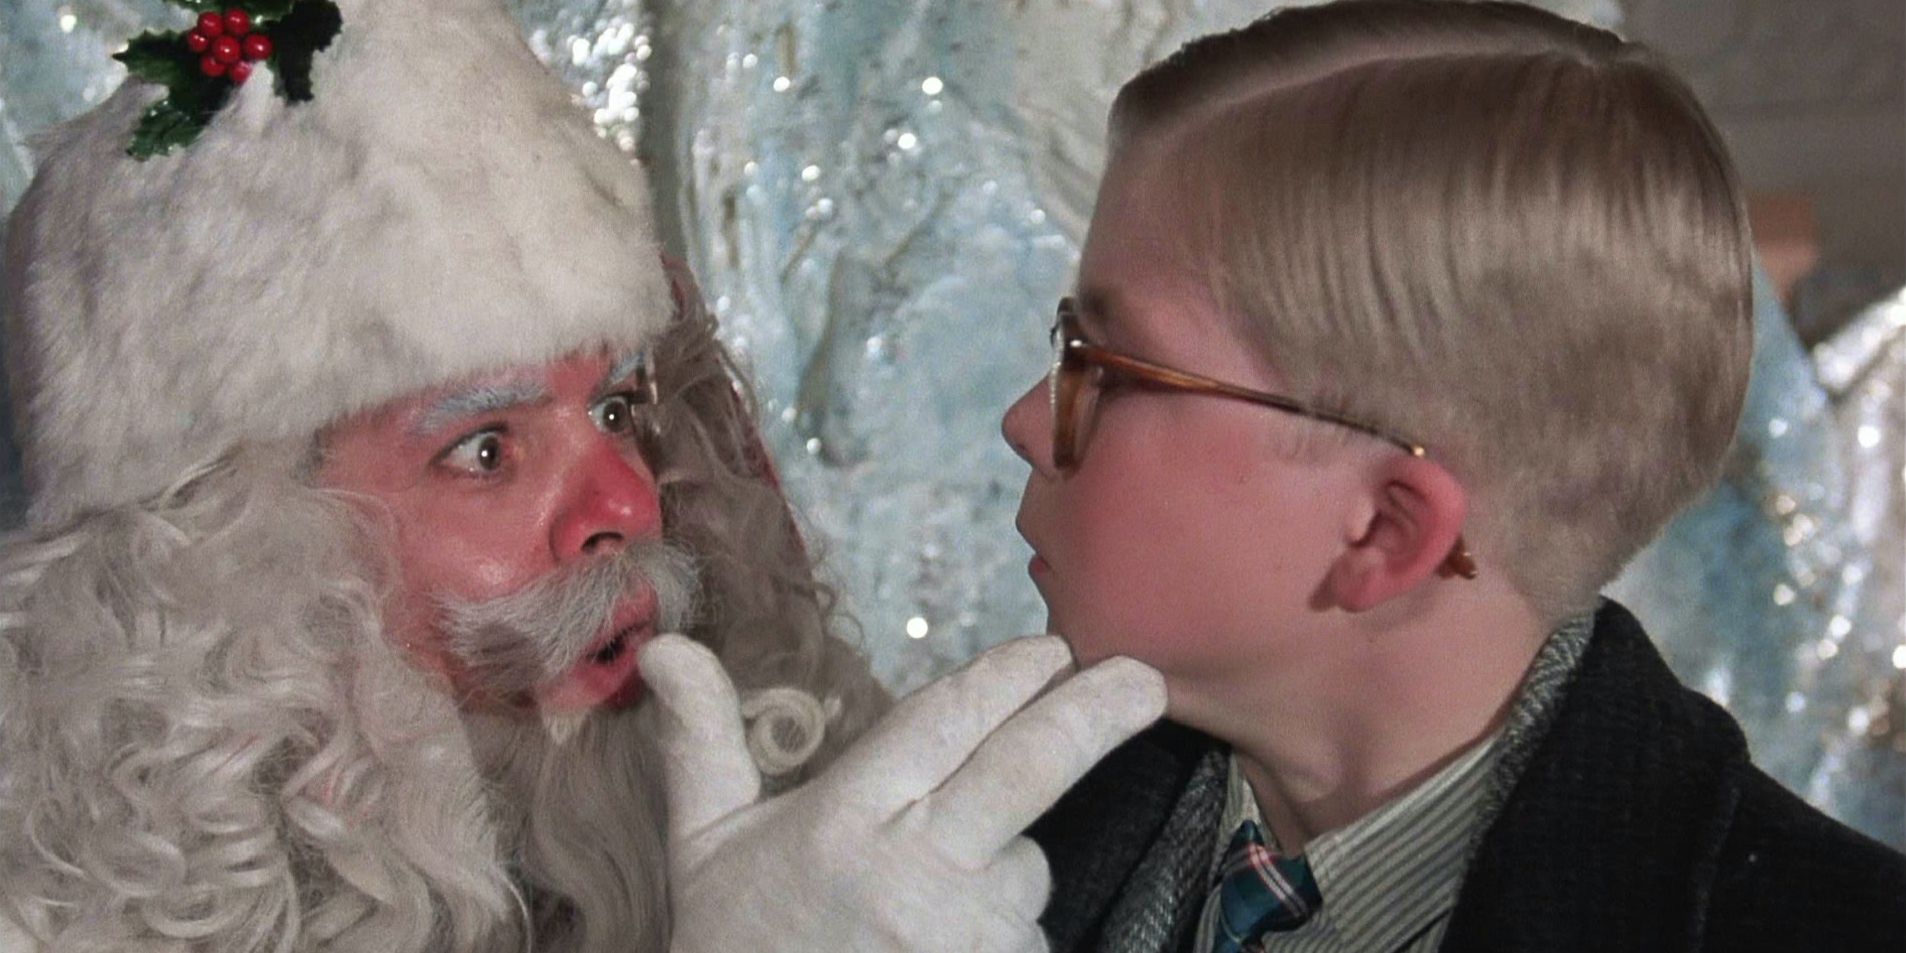 The mall Santa holding Ralphie in A Christmas Story.